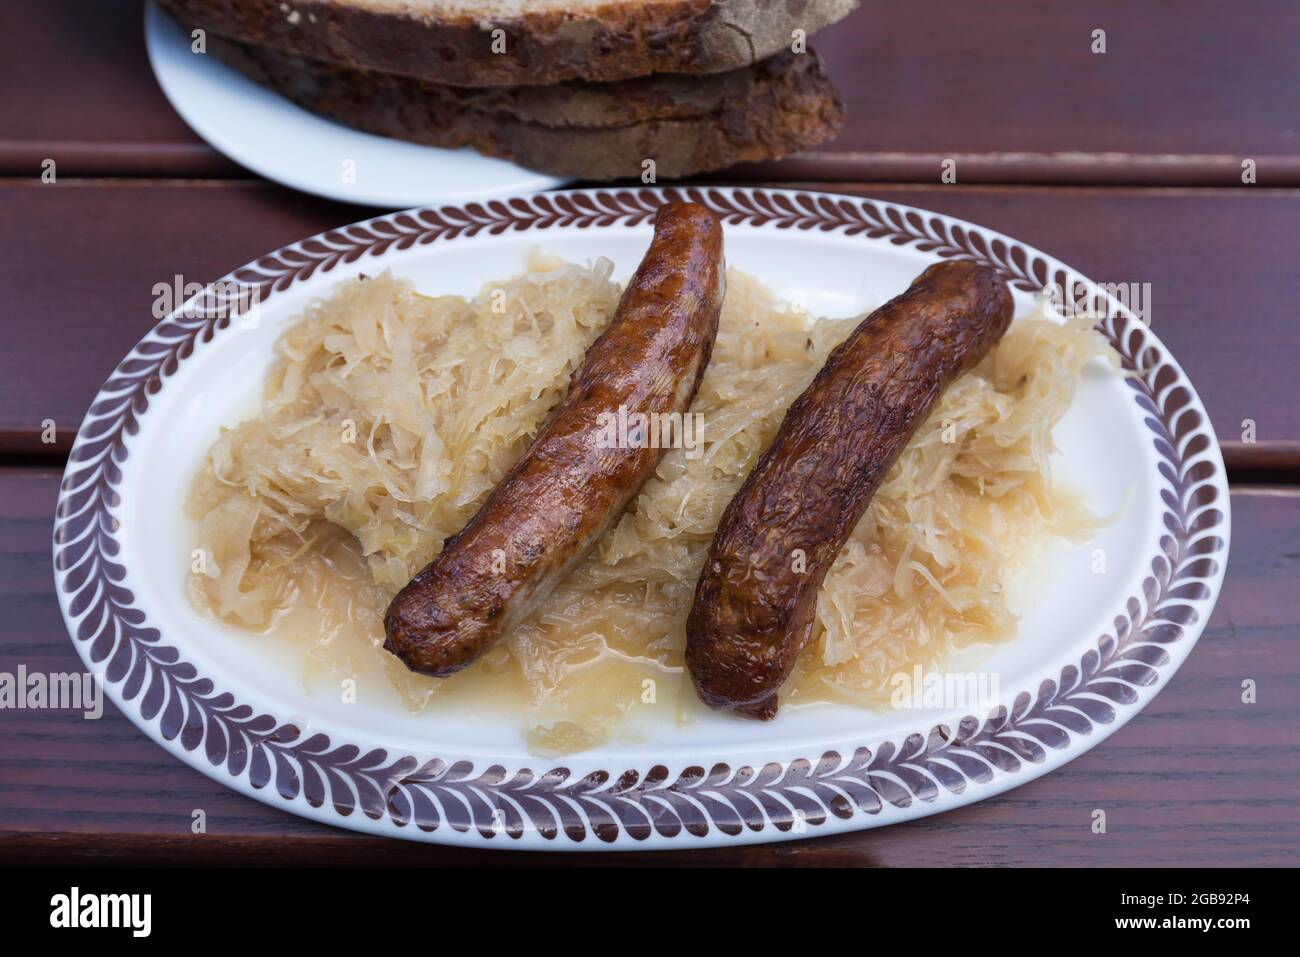 Two Nuremberg bratwursts with sauerkraut and bread on an oval plate in a garden restaurant, Bavaria, Germany Stock Photo